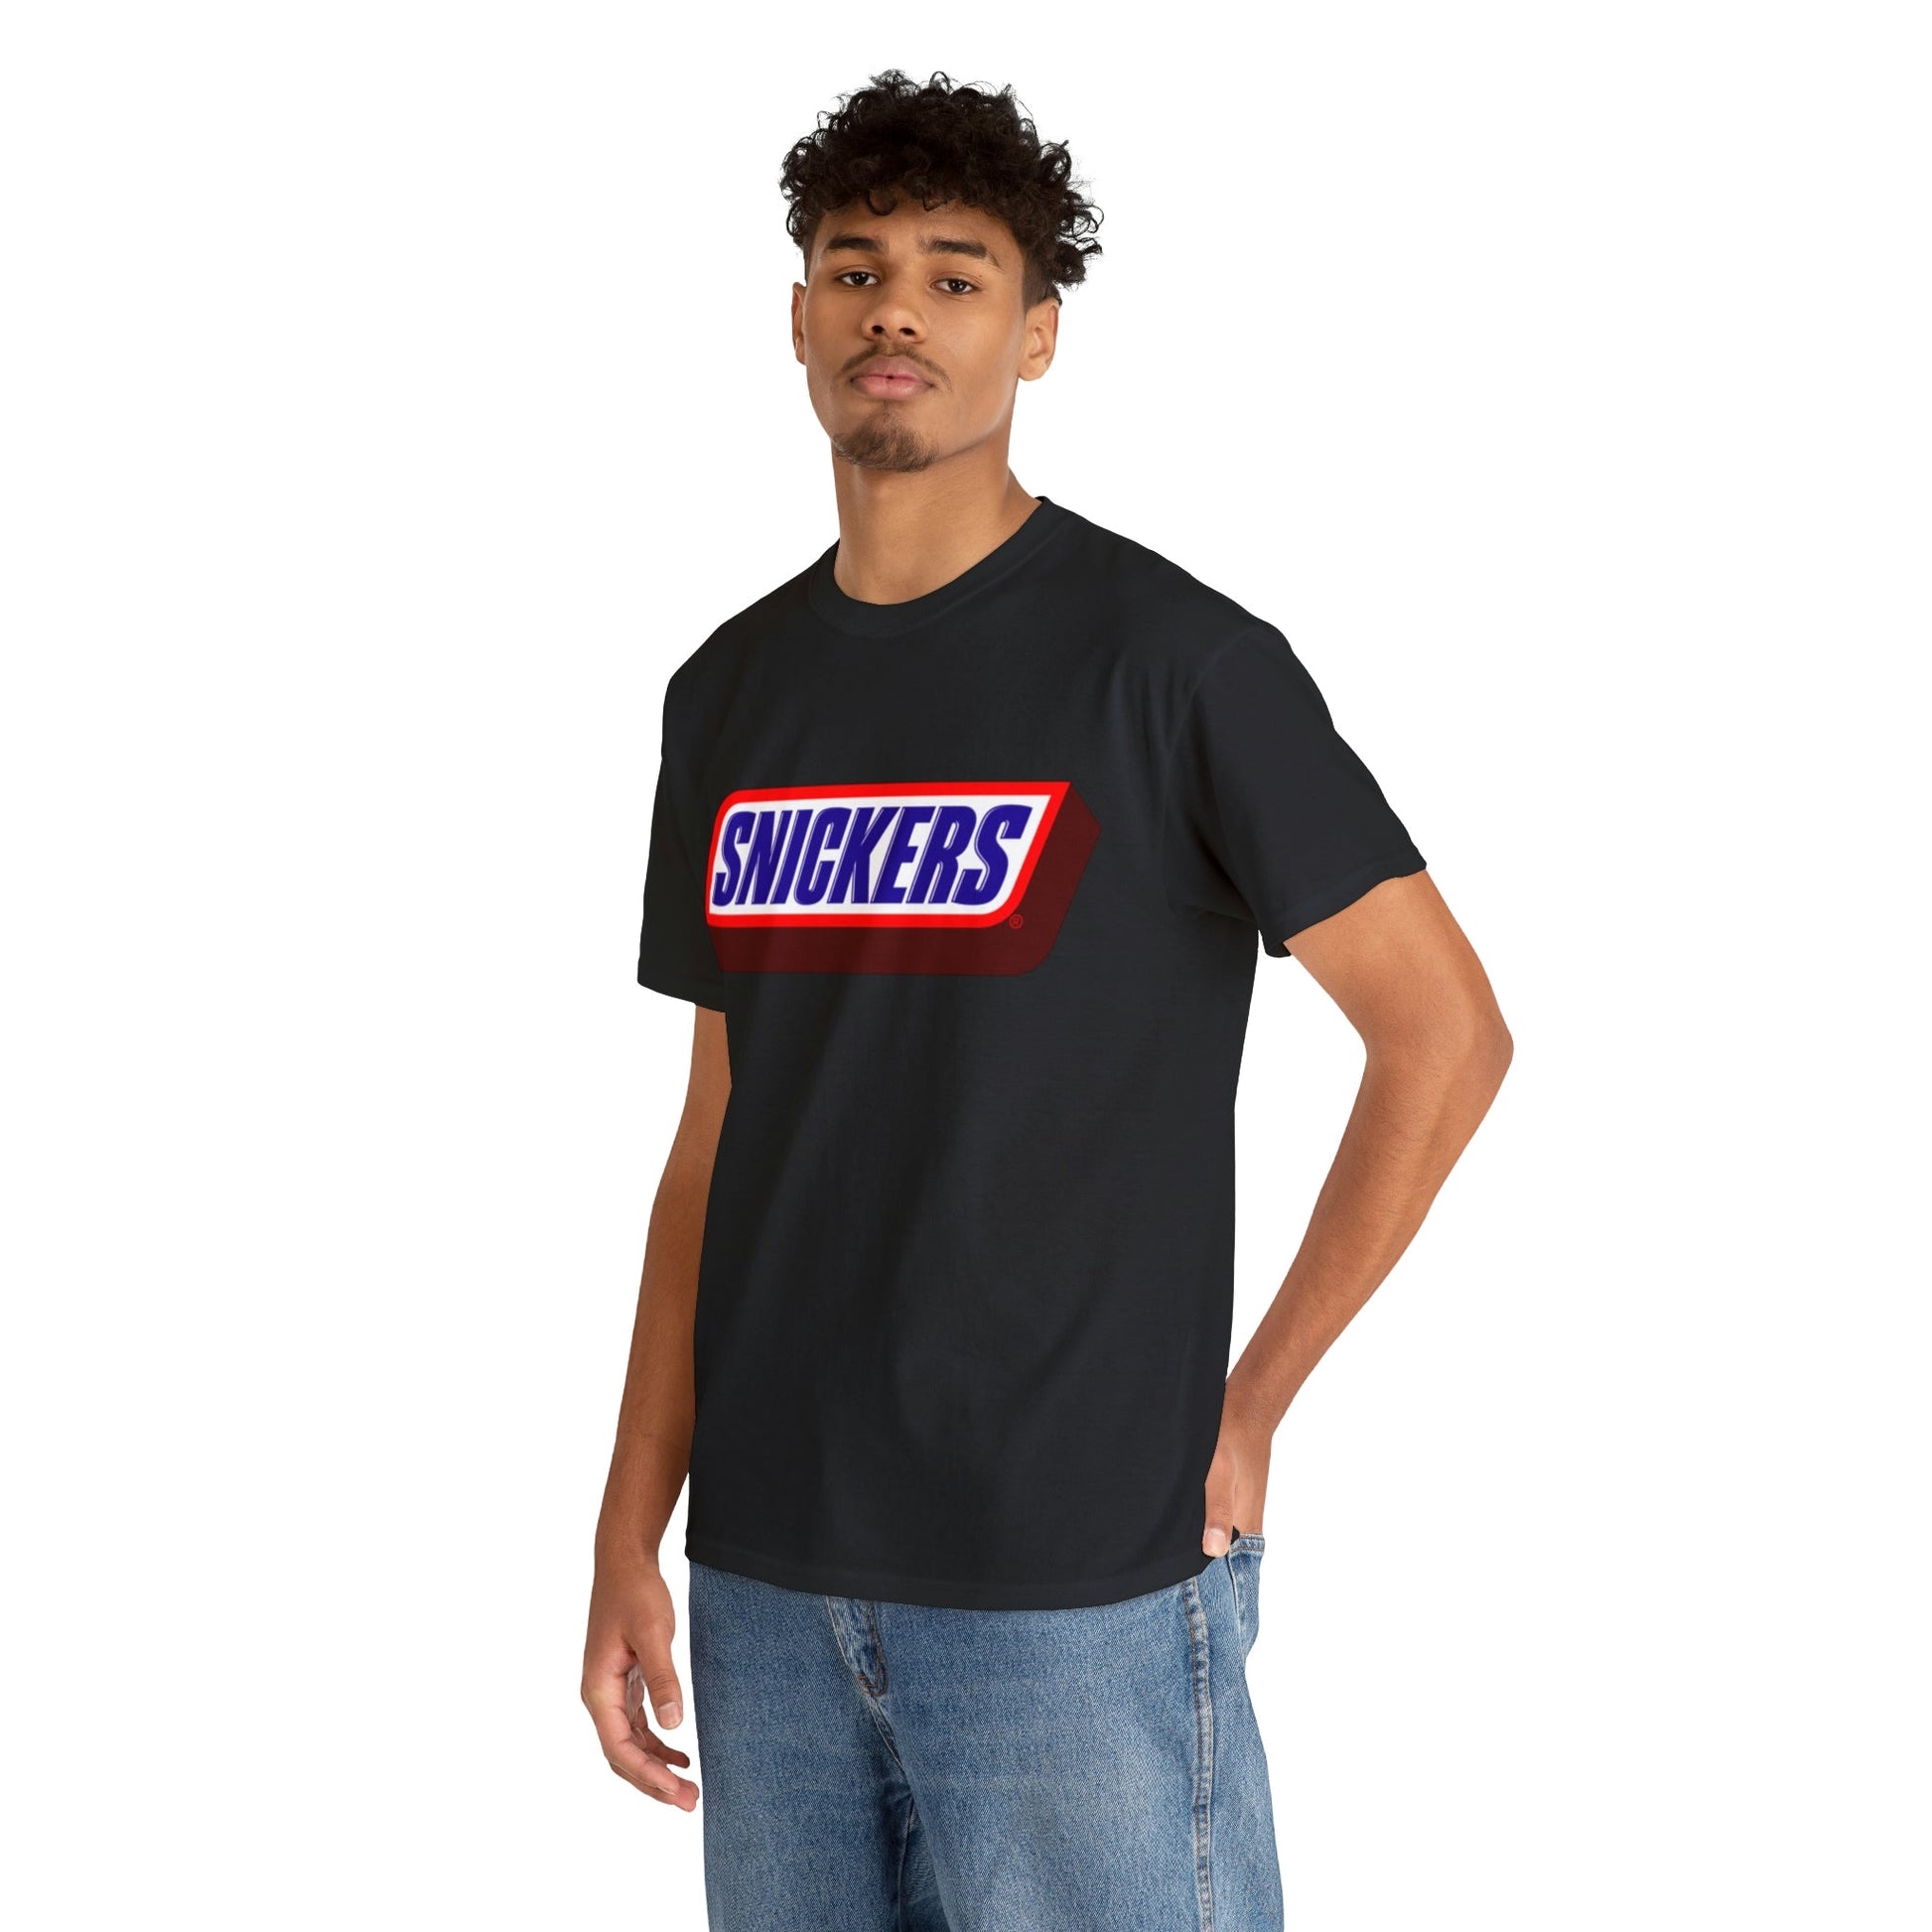 Snickers Candy Bar Logo T-Shirt - RetroTeeShop